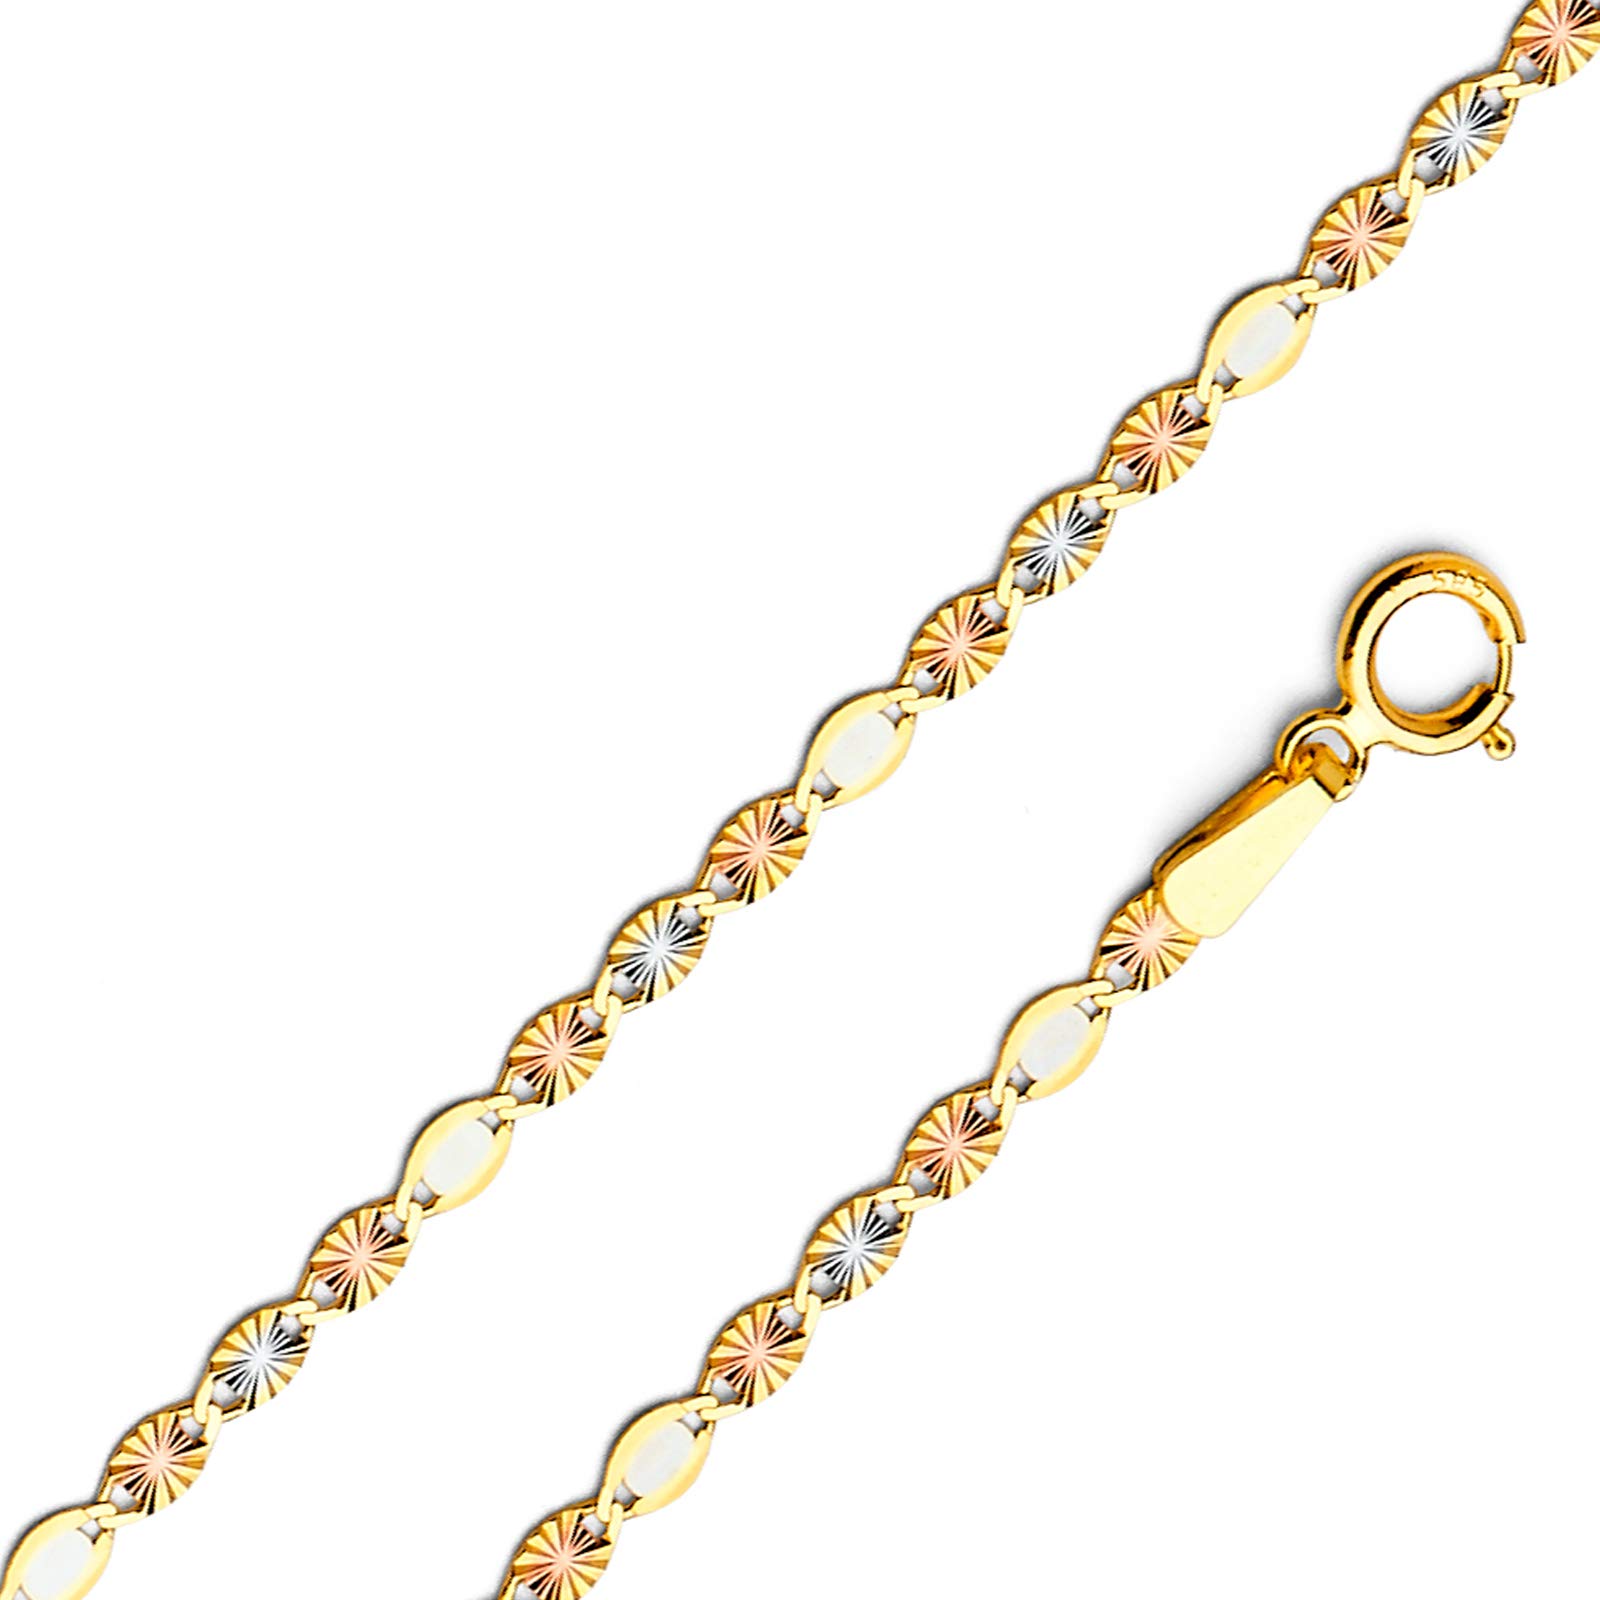 TGDJ 14k Tri Color Gold Solid 2mm Flat Valentino Star Diamond Cut Chain Necklace with Spring Ring Clasp